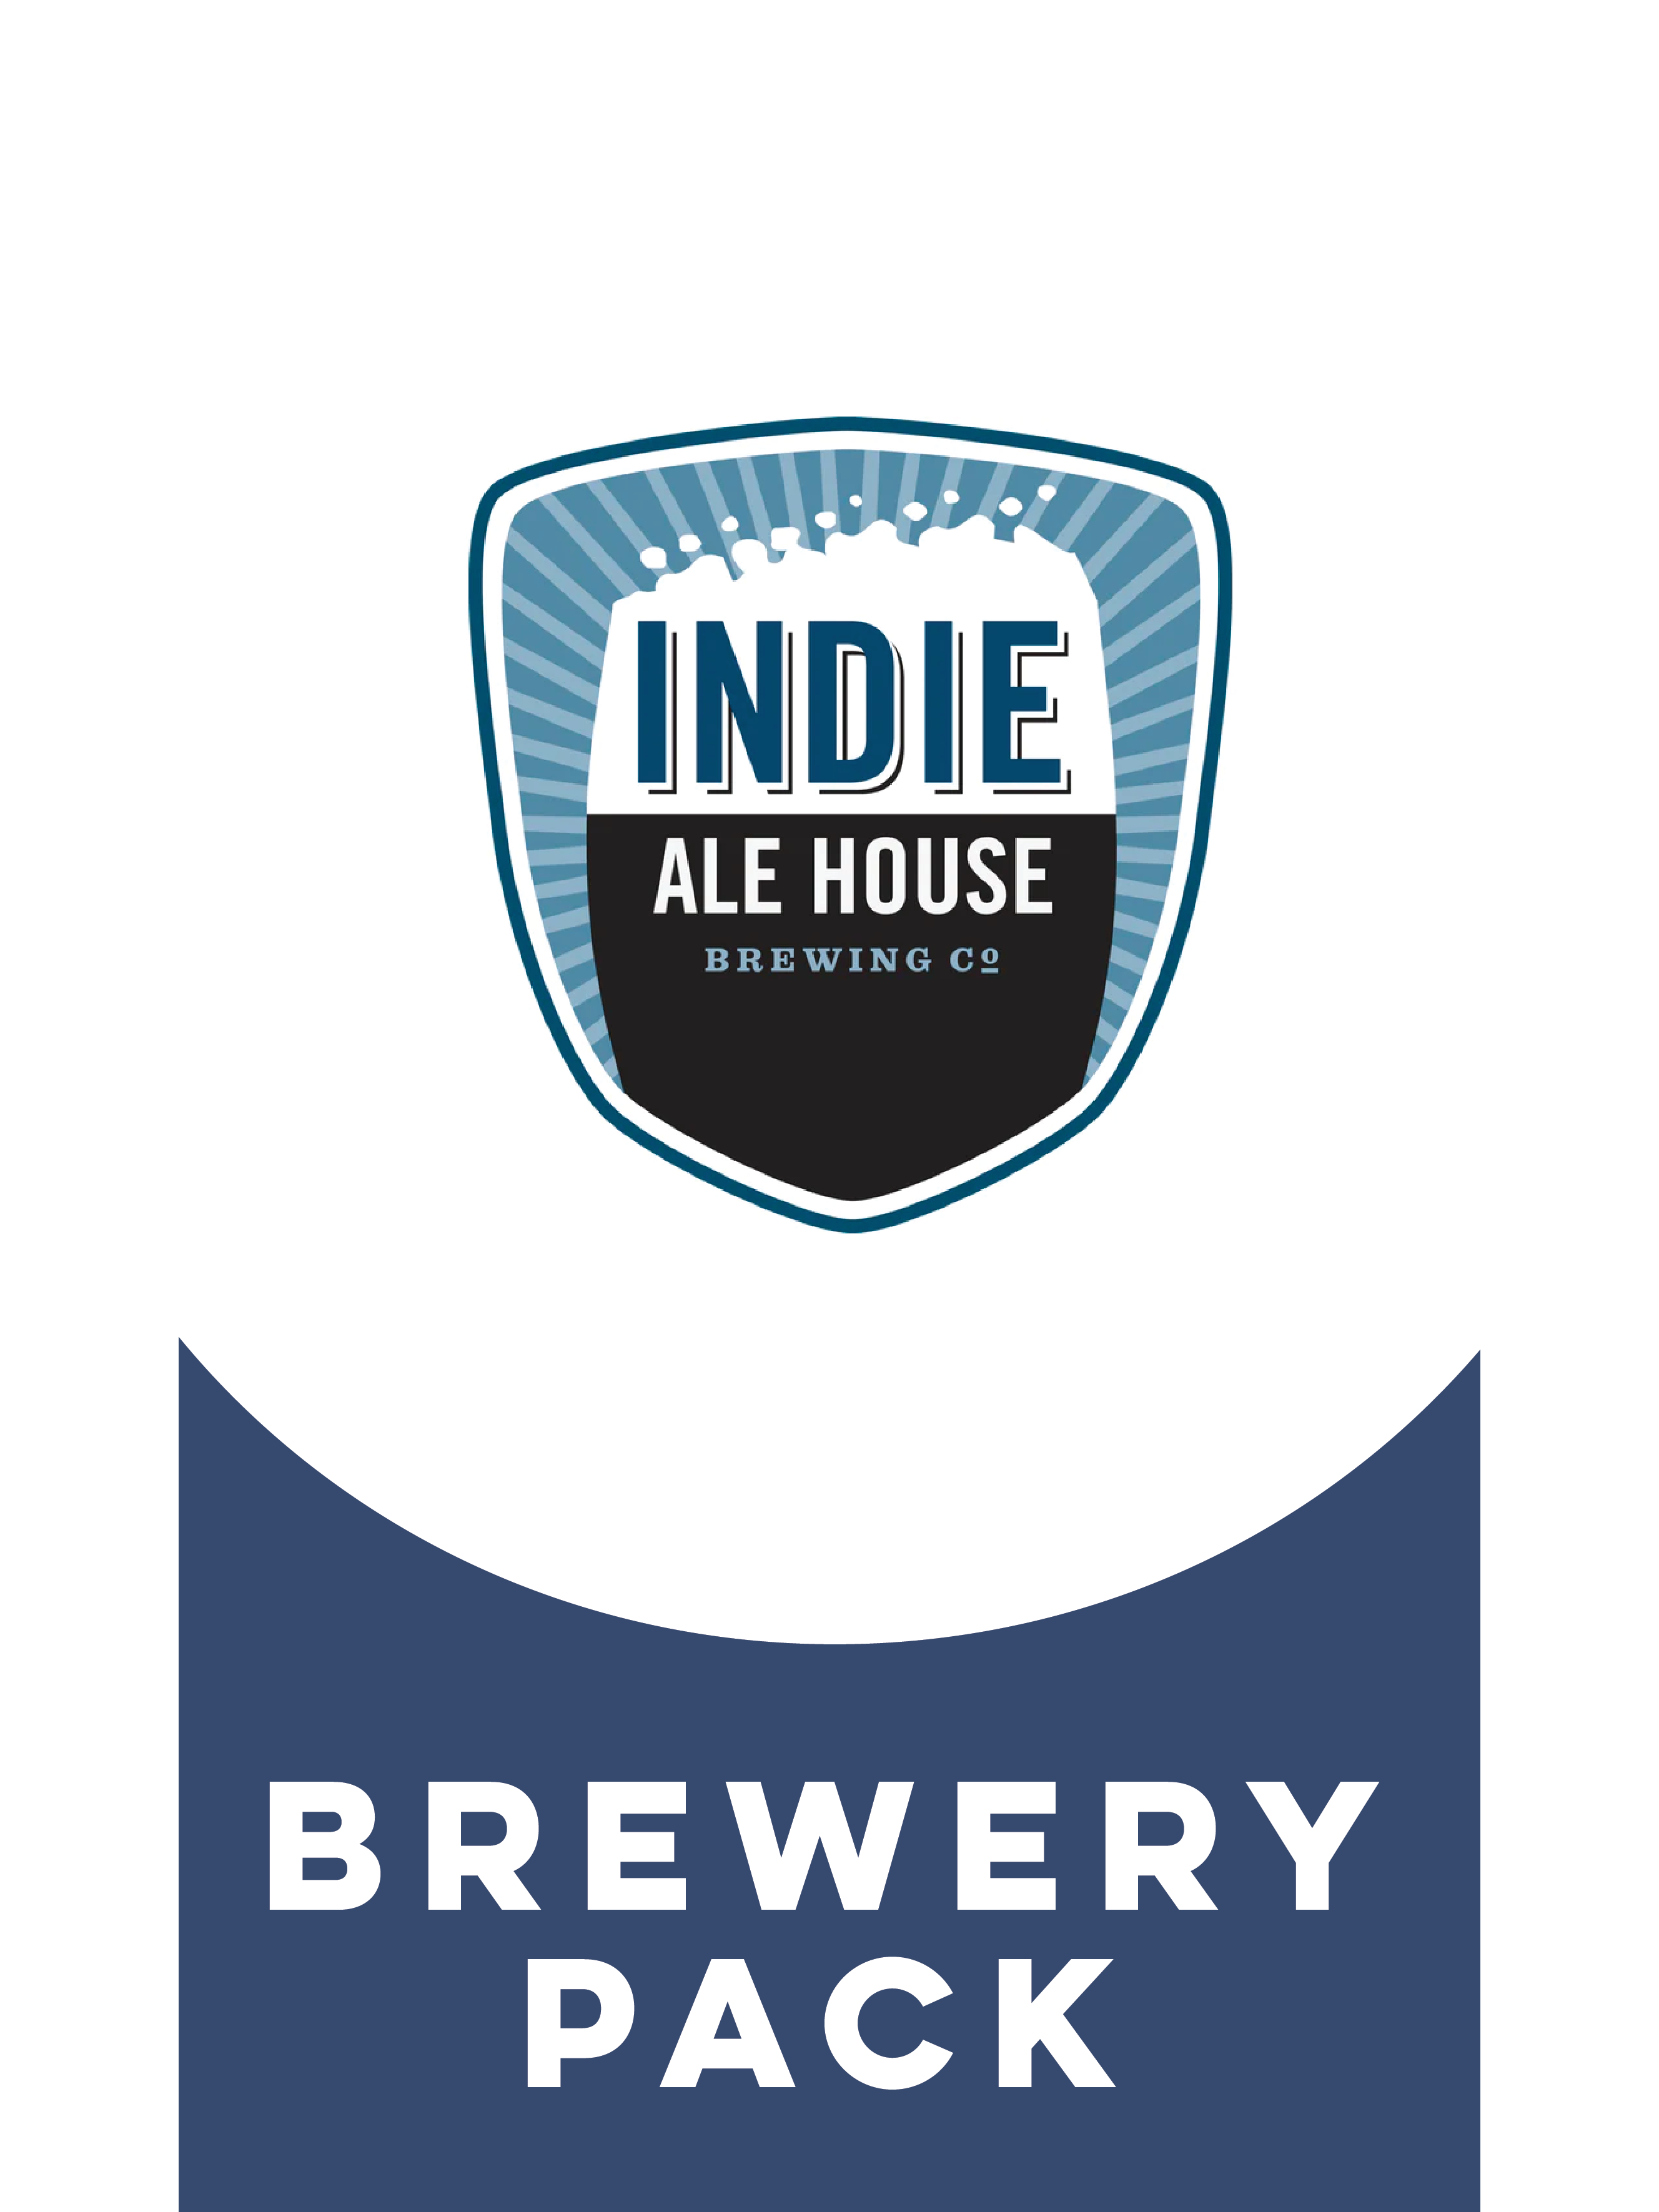 -Indie Alehouse- Indie Alehouse Brewery Pack-Packs & Cases- Only @ Beer Republic - The best online beer store for American & Canadian craft beer - Buy beer online from the USA and Canada - Bier online kopen - Amerikaans bier kopen - Craft beer store - Craft beer kopen - Amerikanisch bier kaufen - Bier online kaufen - Acheter biere online - IPA - Stout - Porter - New England IPA - Hazy IPA - Imperial Stout - Barrel Aged - Barrel Aged Imperial Stout - Brown - Dark beer - Blond - Blonde - Pilsner - Lager - Whe